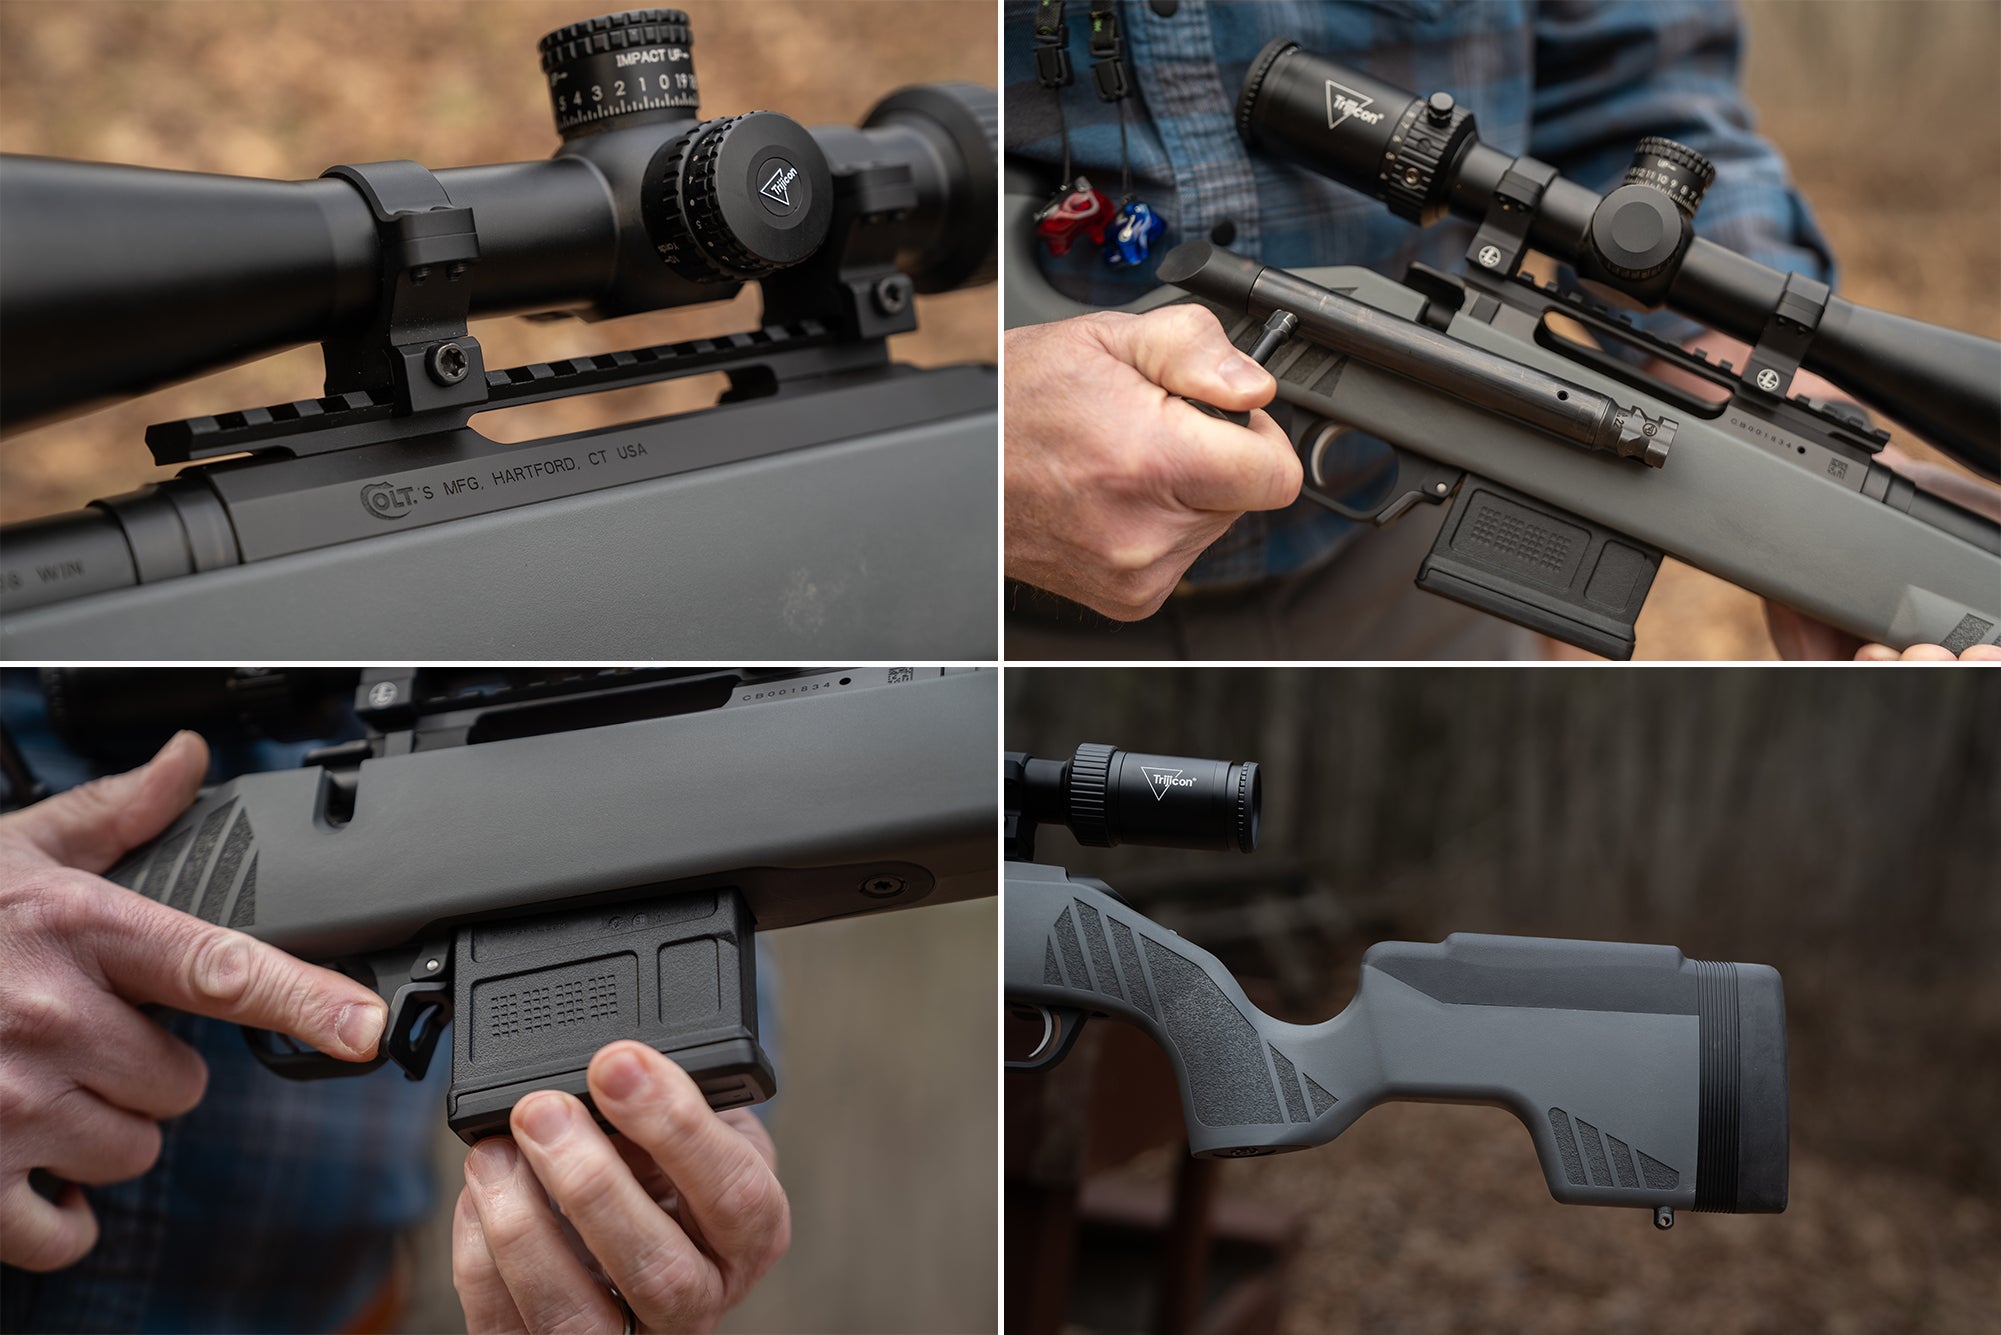 Close-up images of the Colt CBX TAC Hunter's rail, bolt, magazine, and buttstock